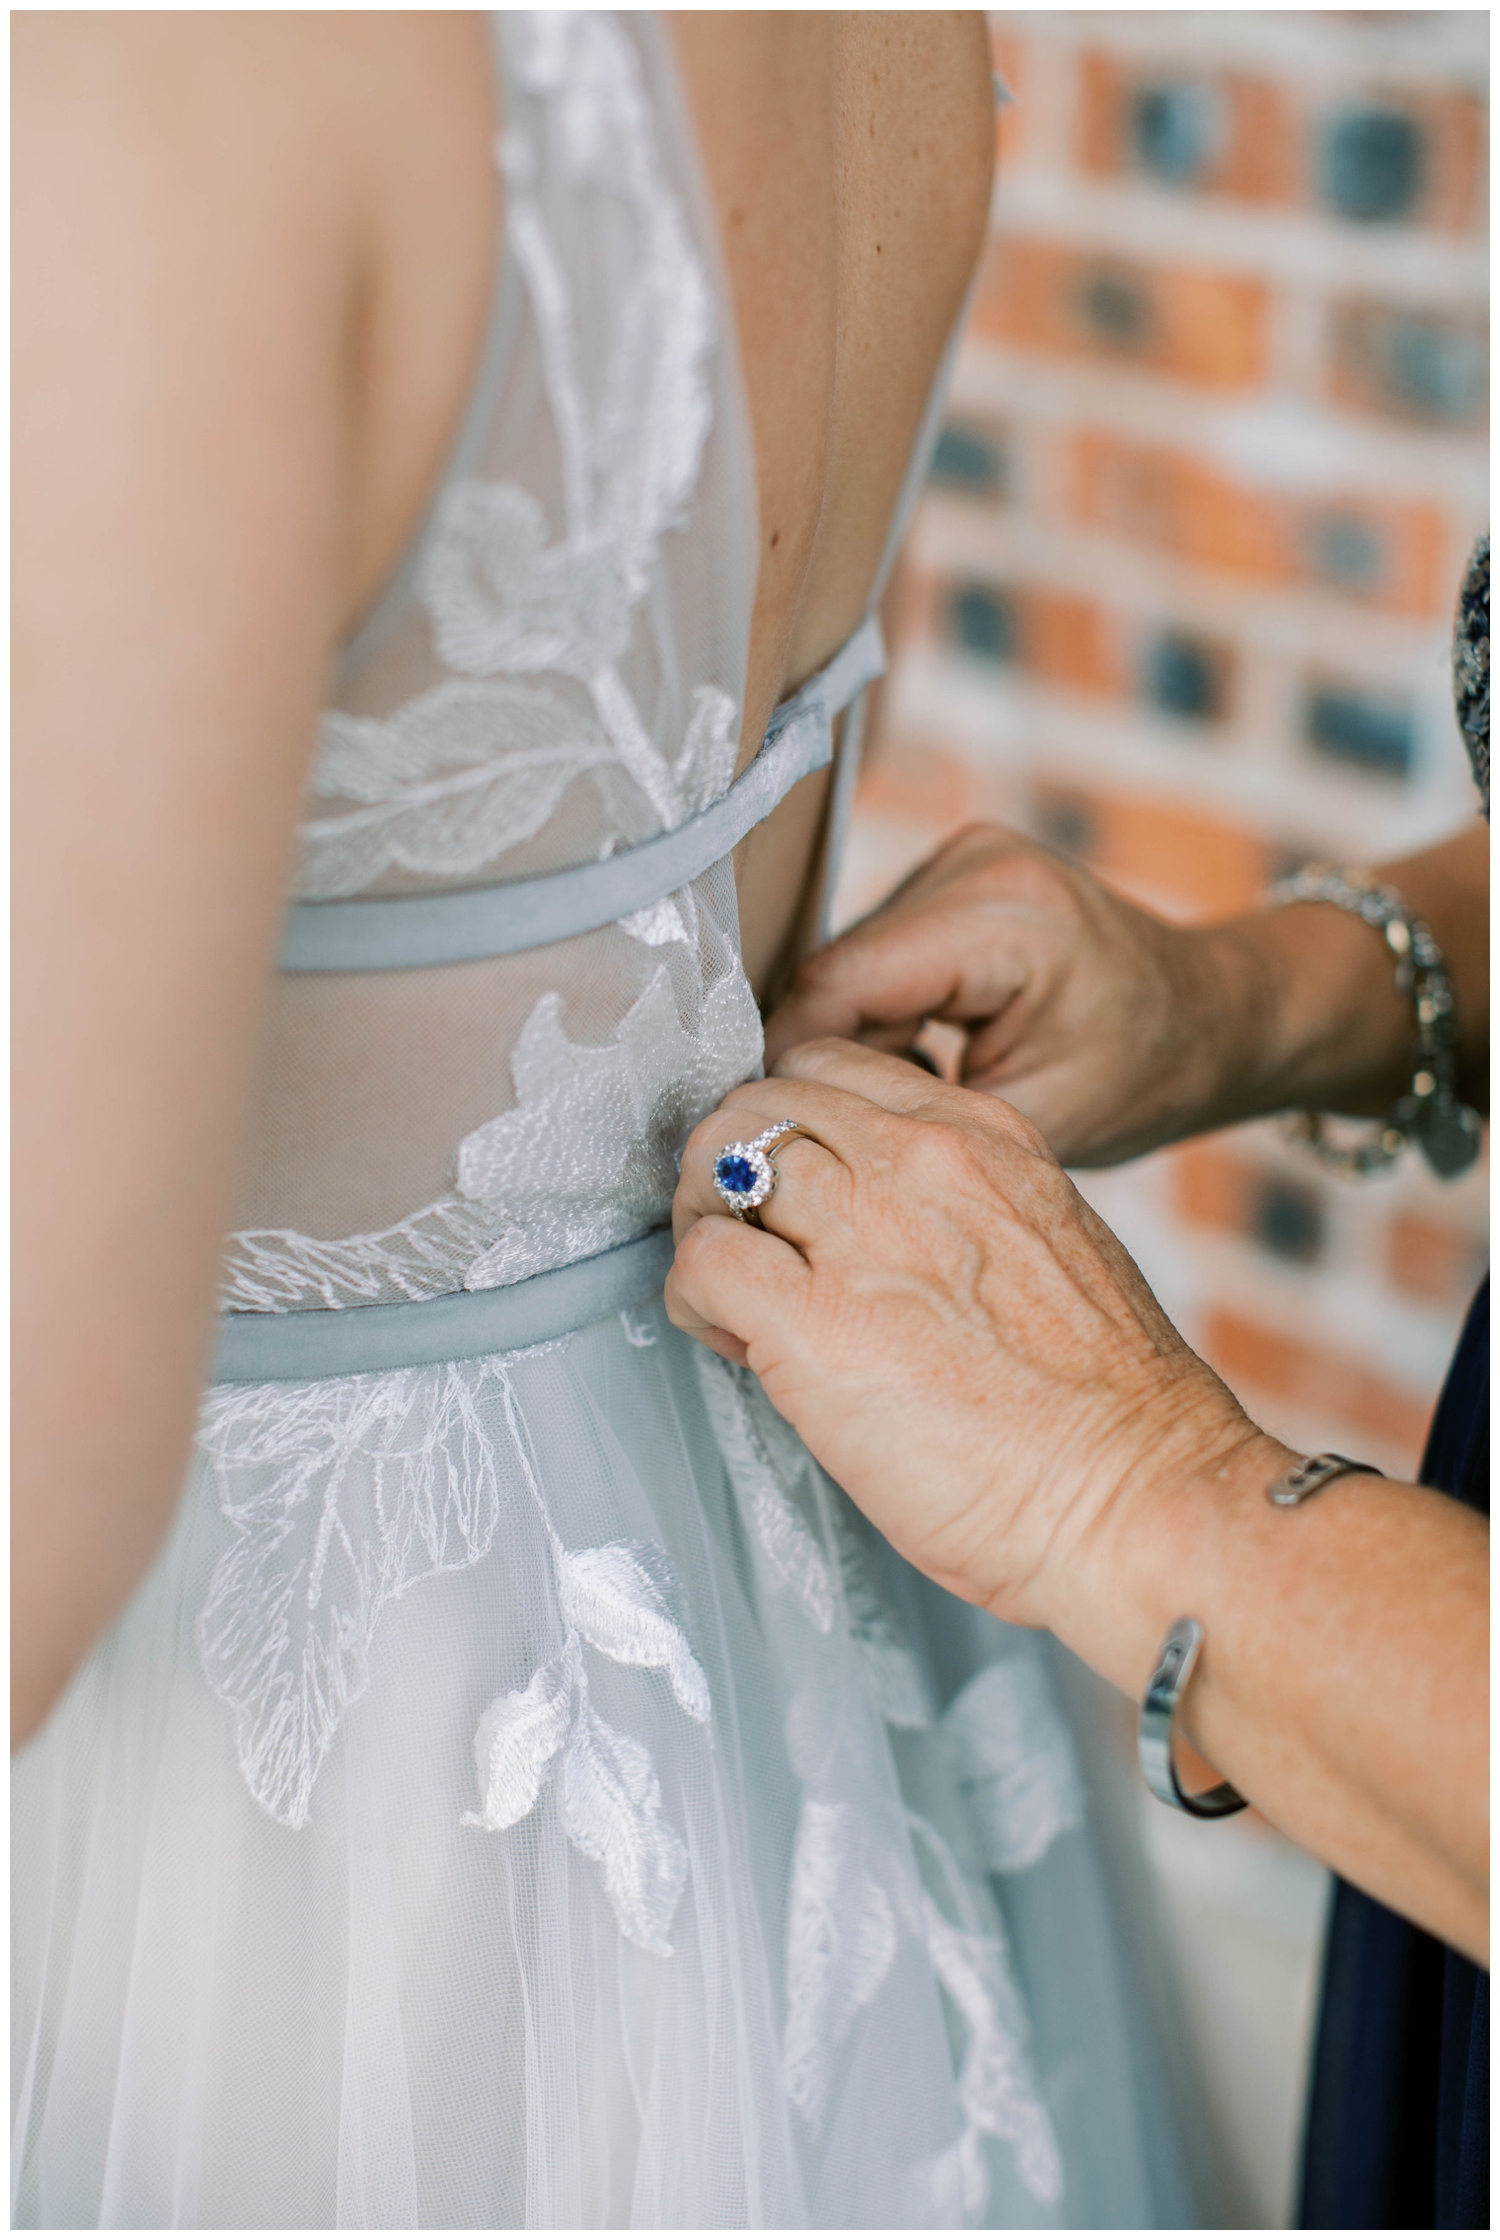 hands buttoning wedding gown